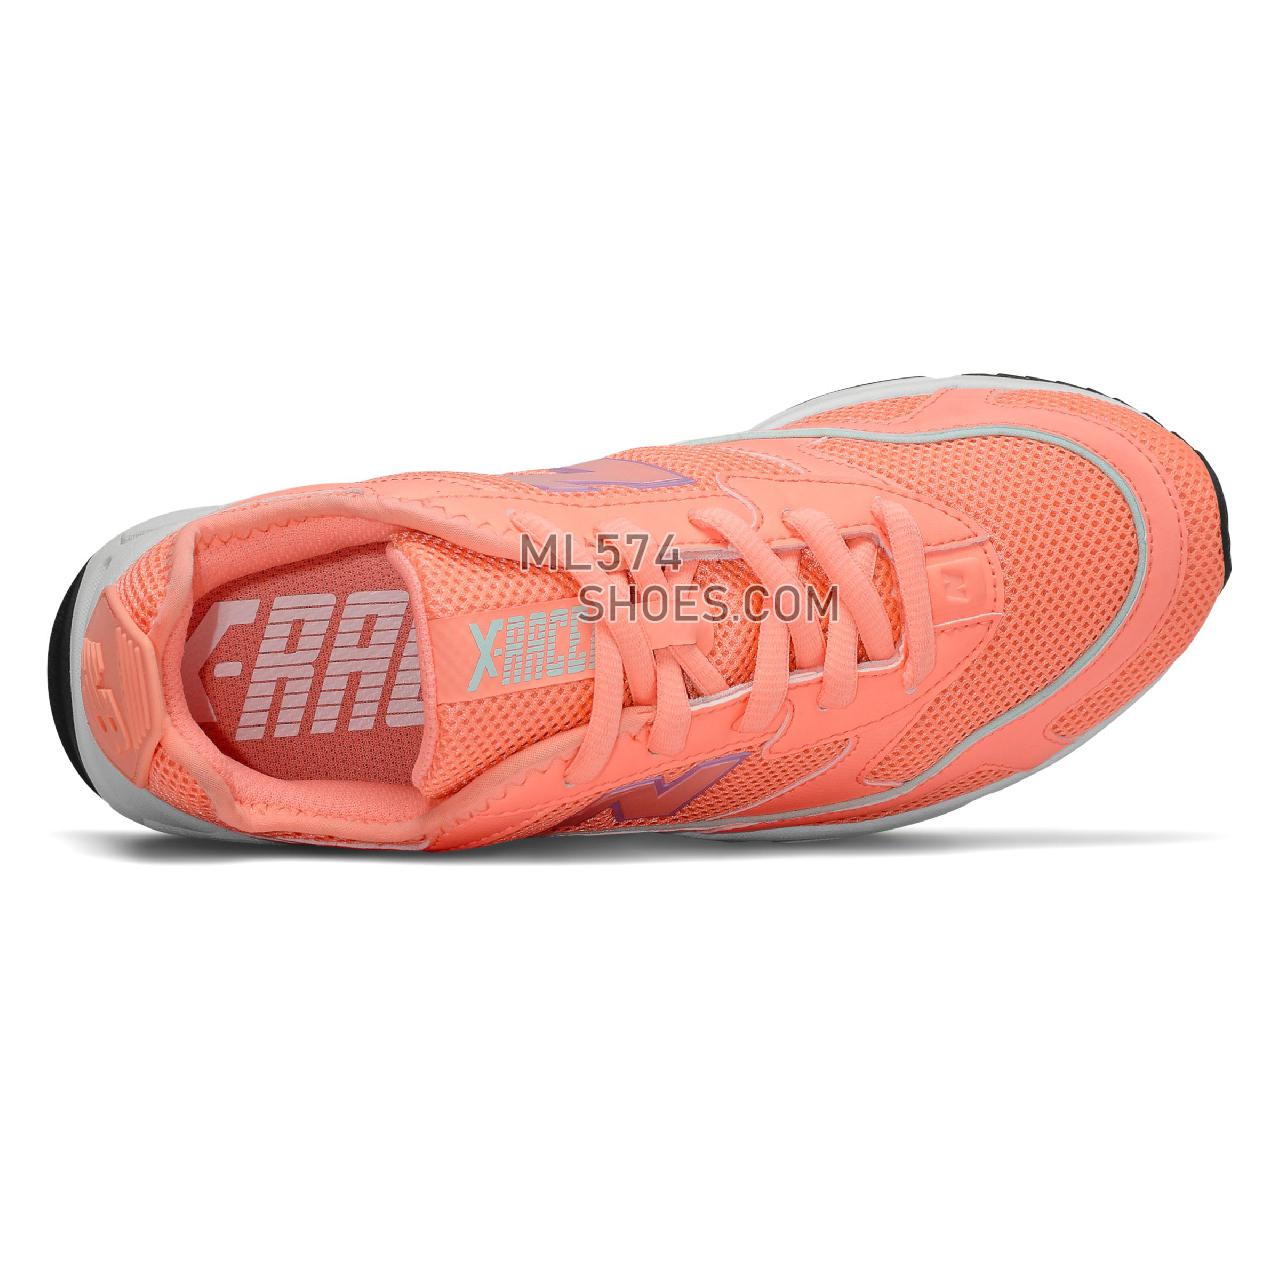 New Balance X-Racer - Women's Sport Style Sneakers - Ginger Pink with Canyon Violet - WSXRCNTA